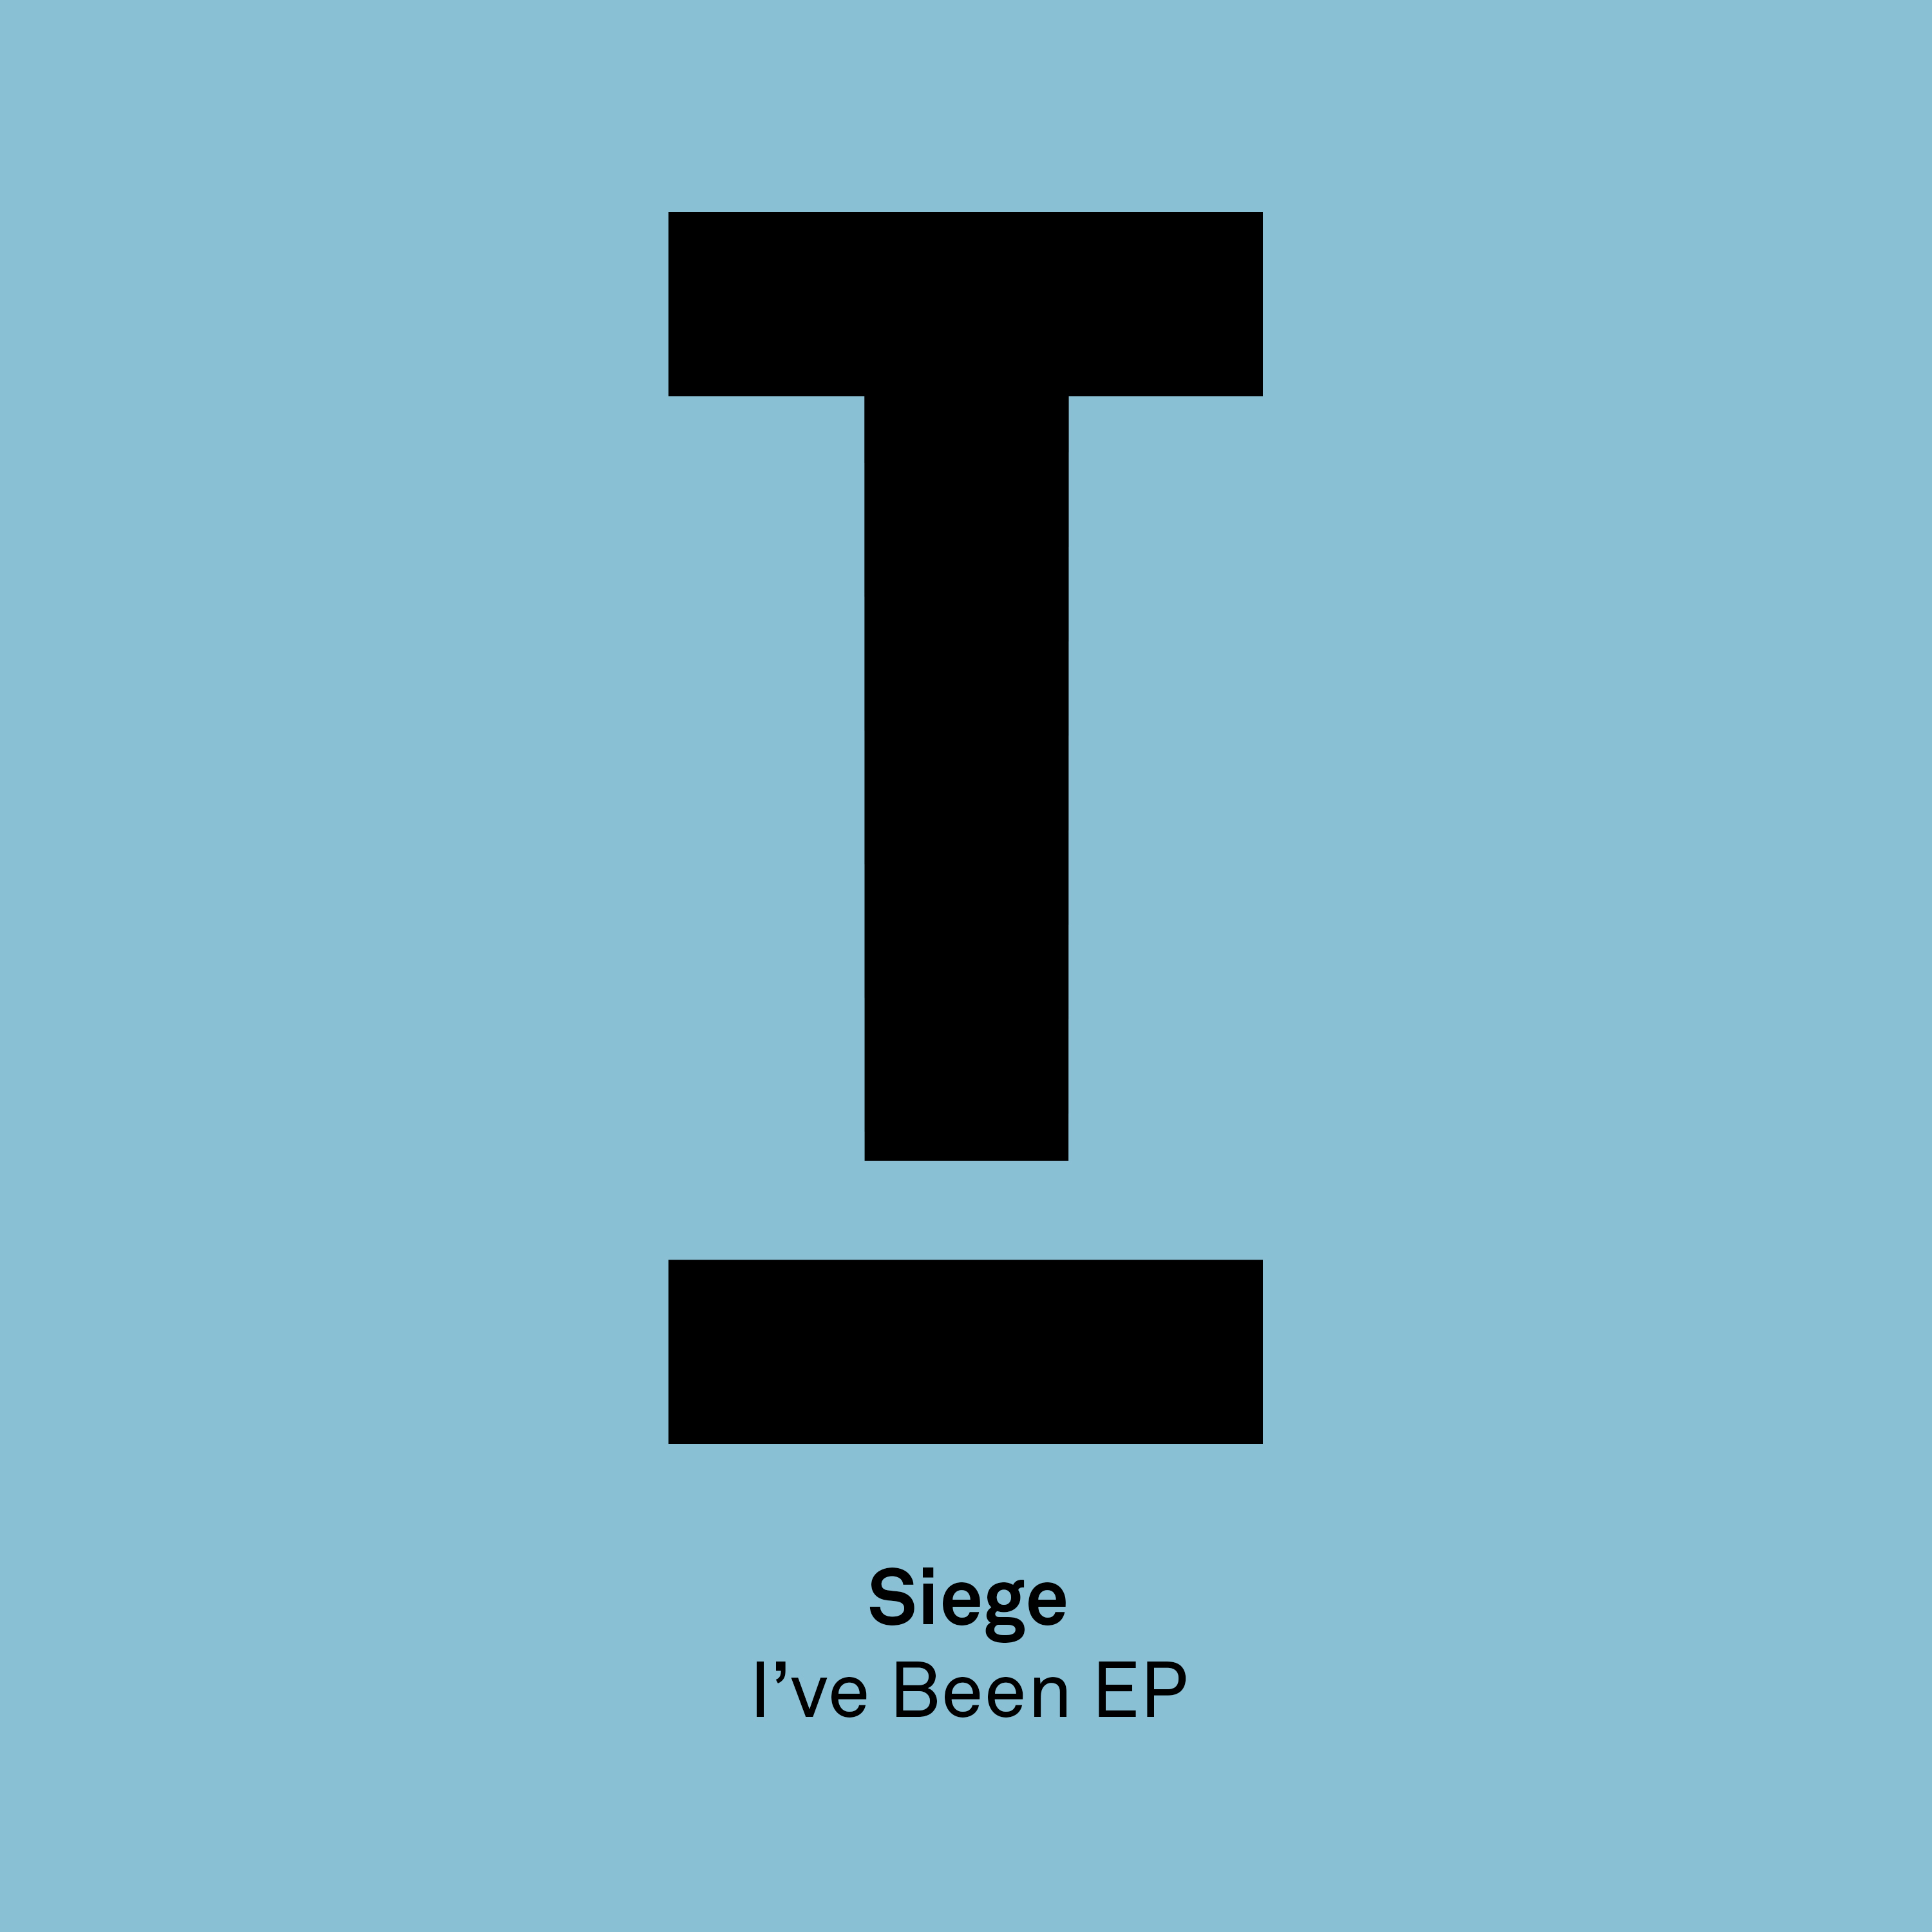 I' ve Been EP